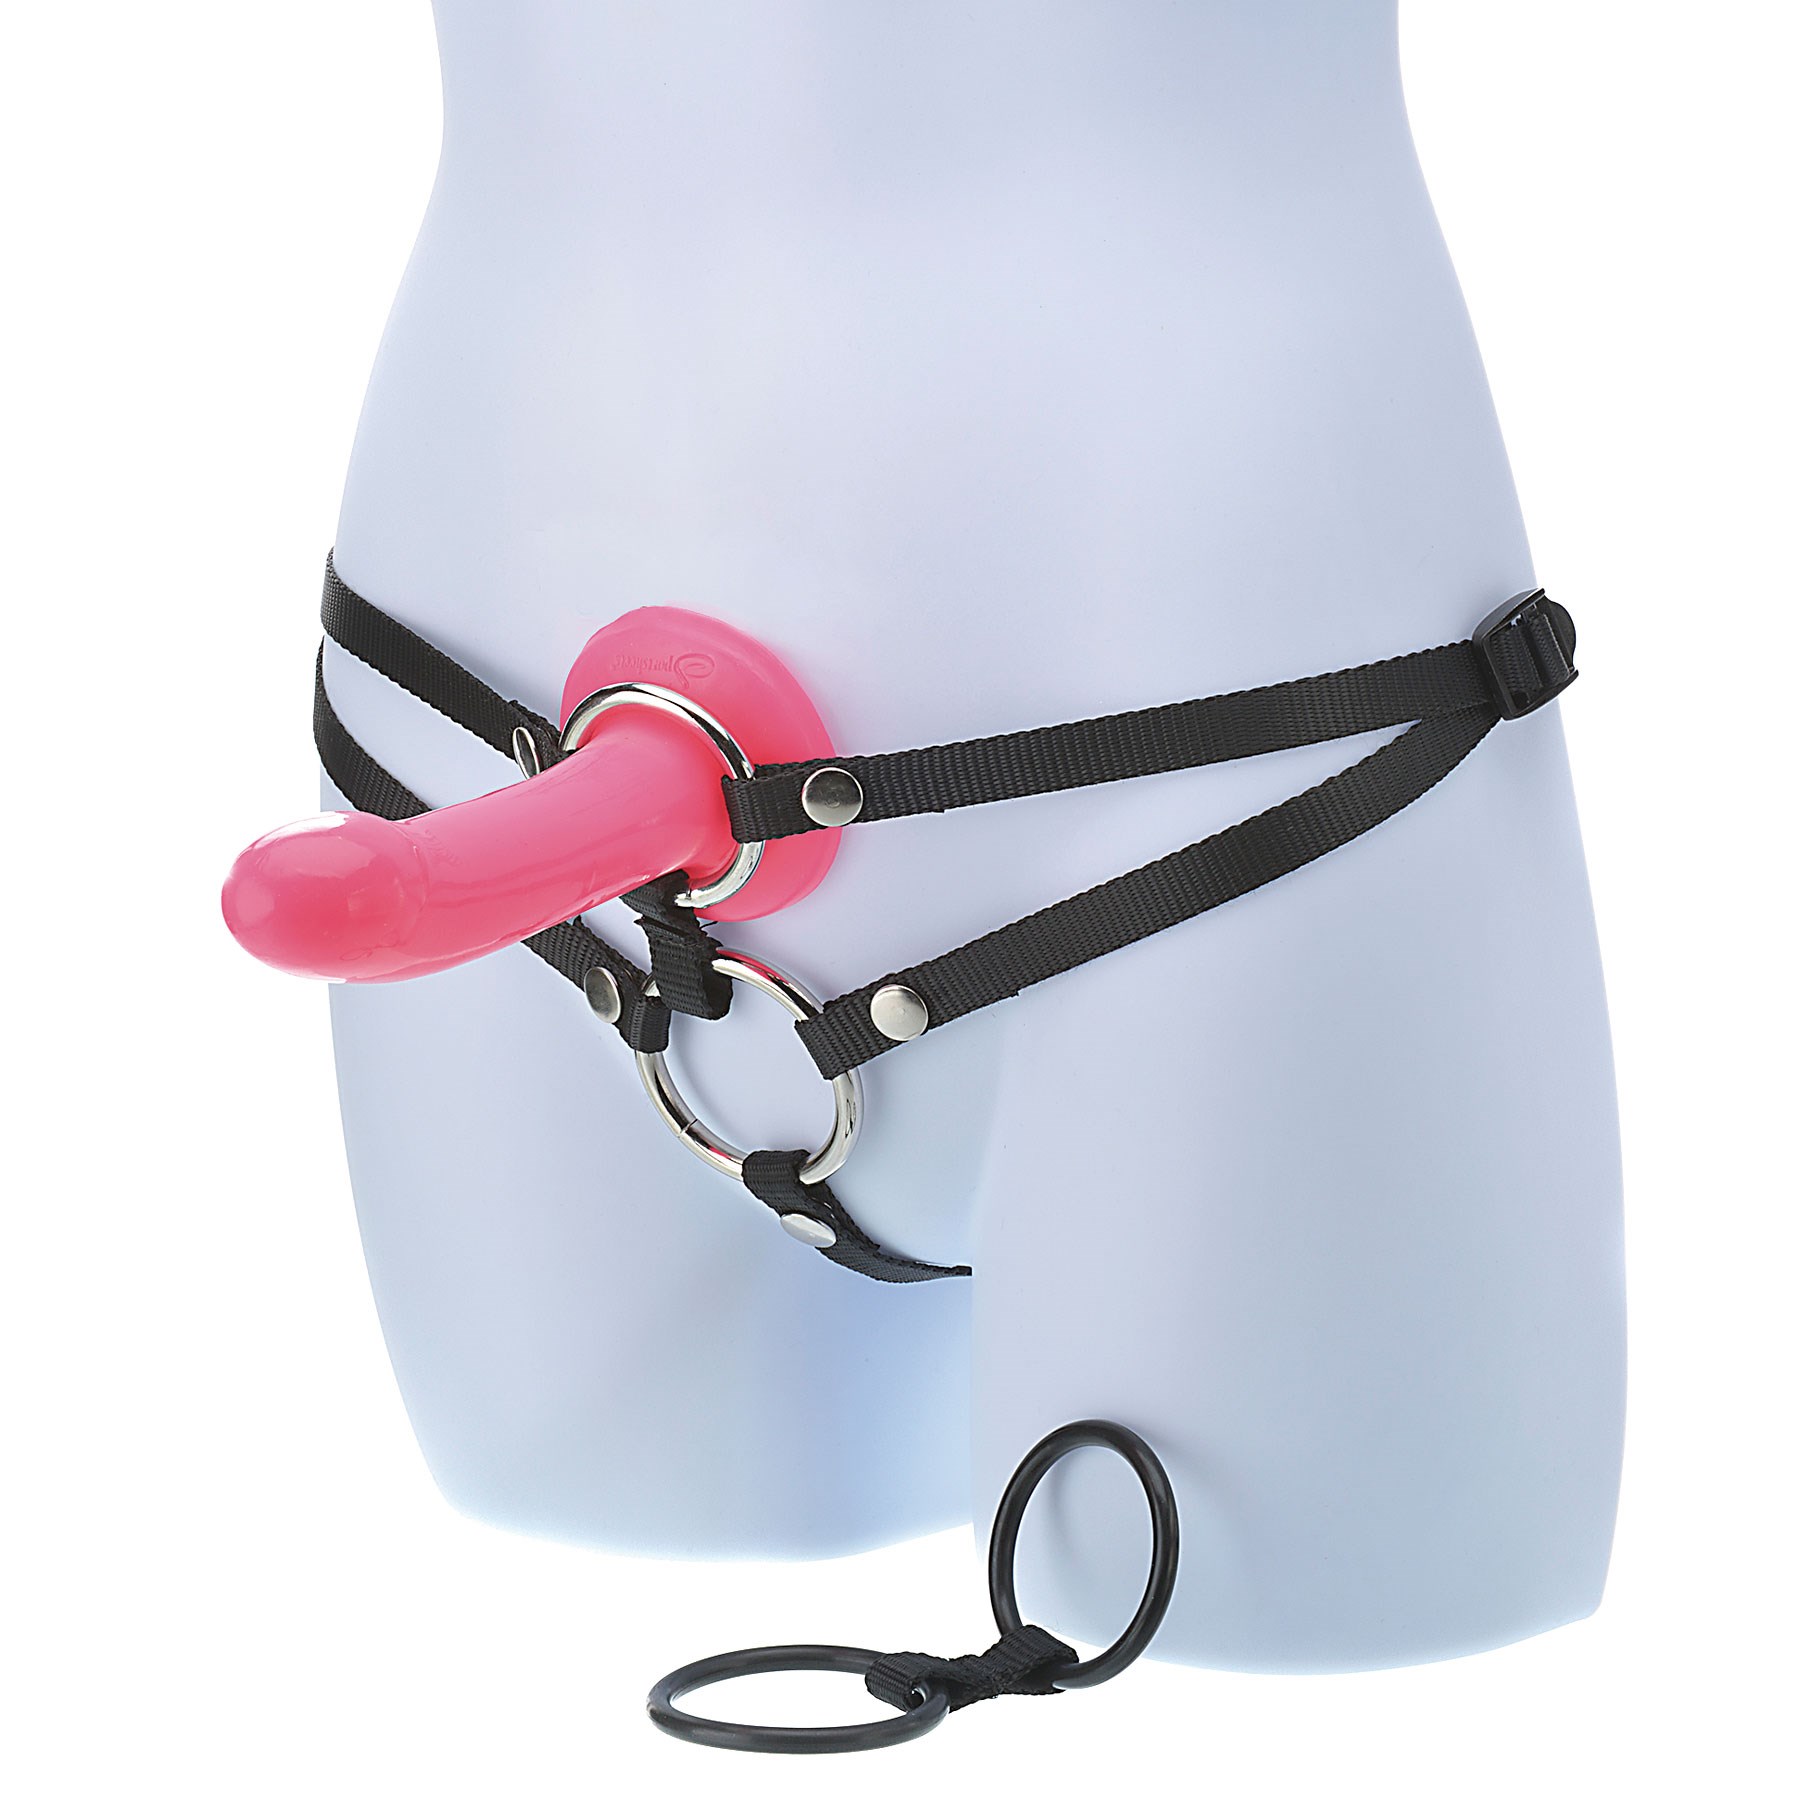 Menage a Trois DP Strap-On on model